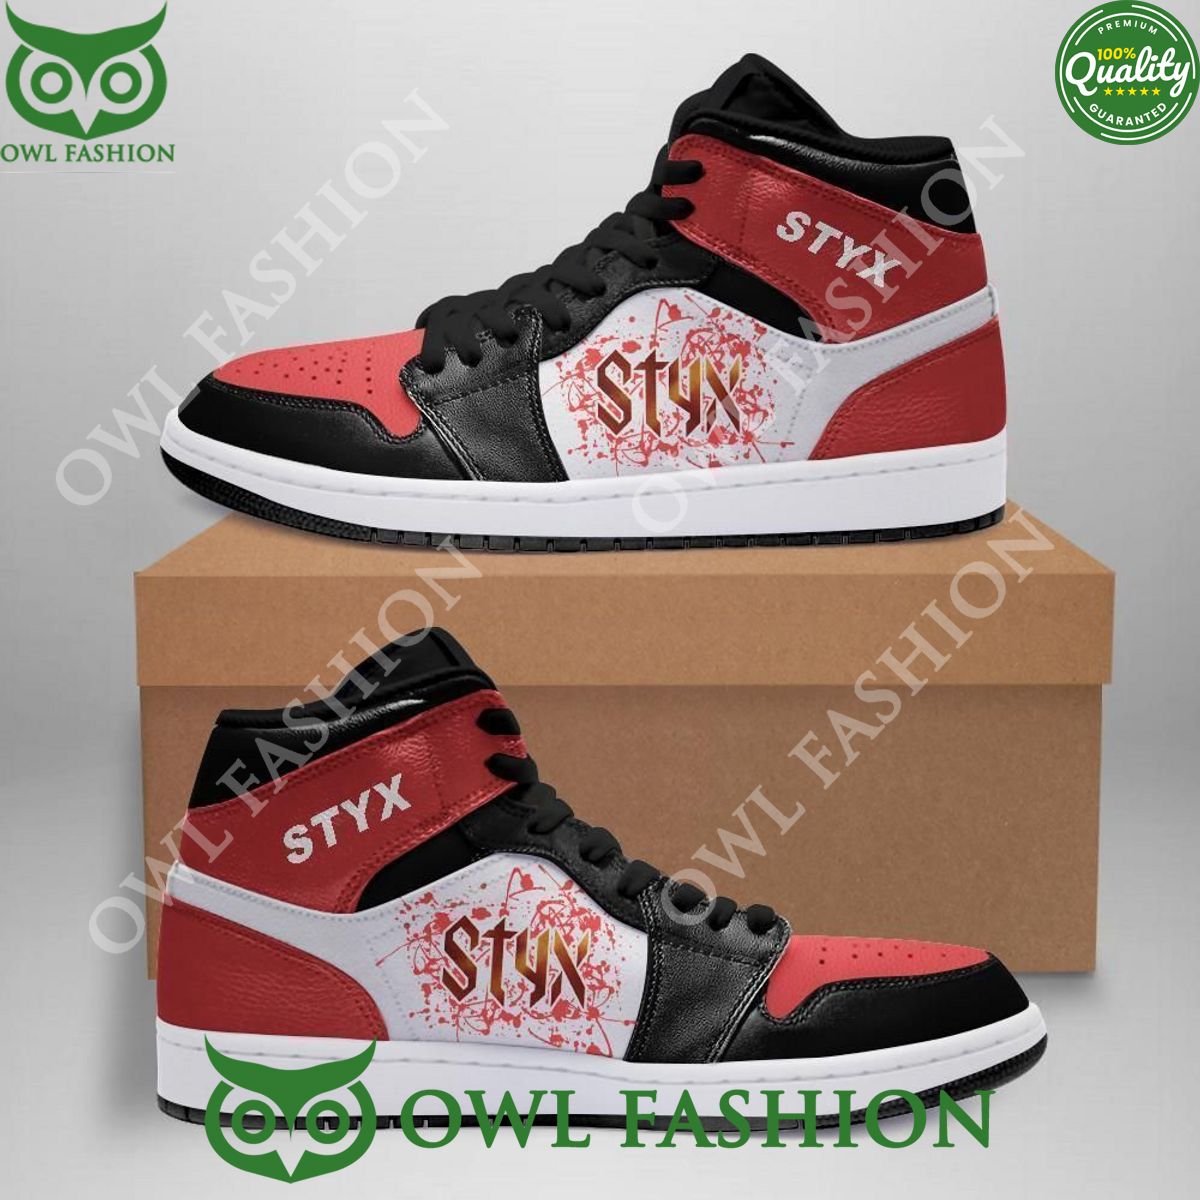 Styx Rock Band Limited Air Jordan High Top Shoes This place looks exotic.